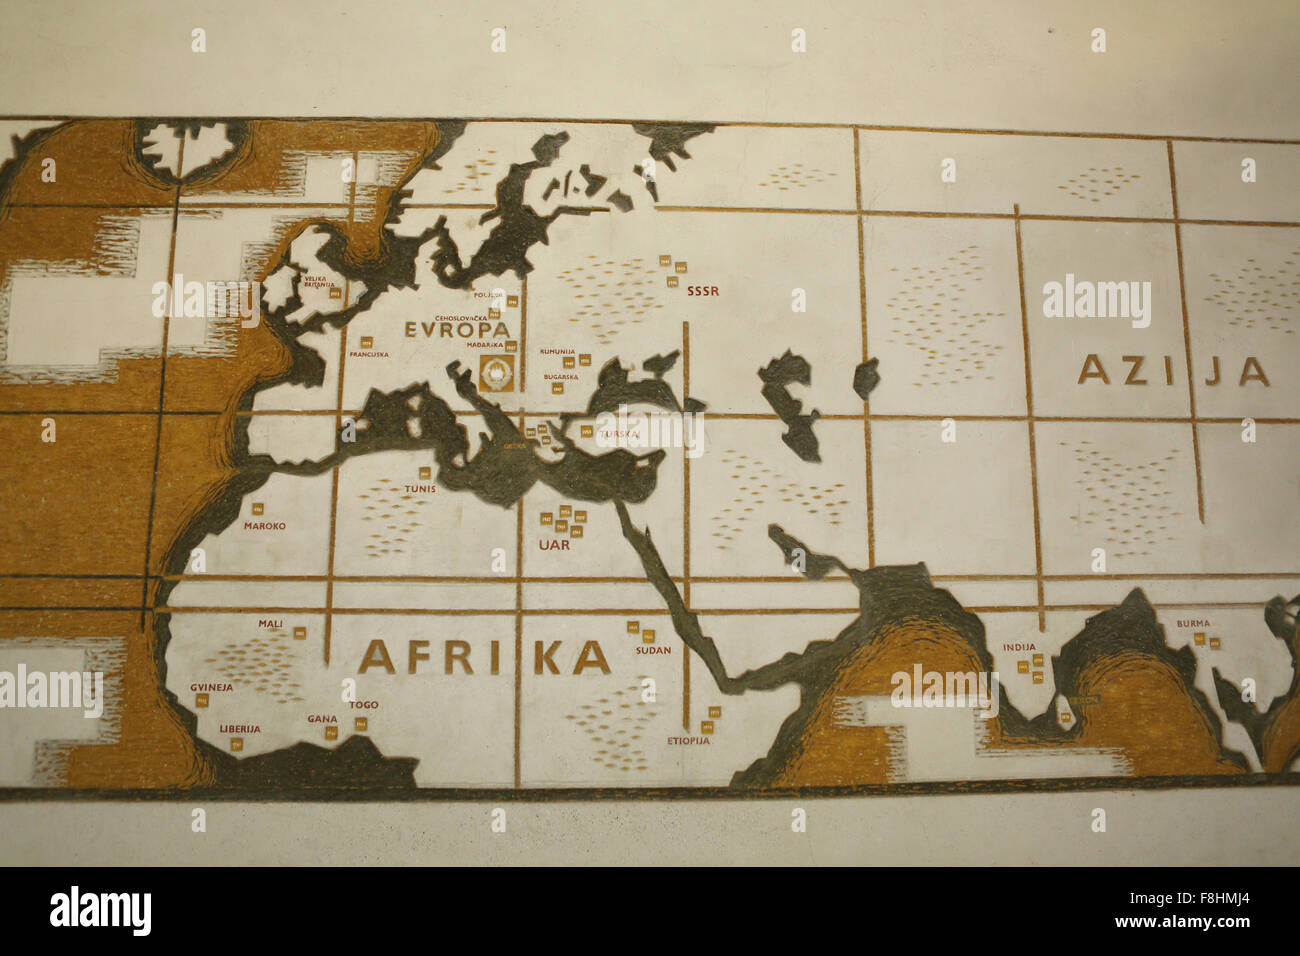 A map of Europe, Africa and Asia in the Museum of Yugoslav History in Belgrade, Serbia. Stock Photo